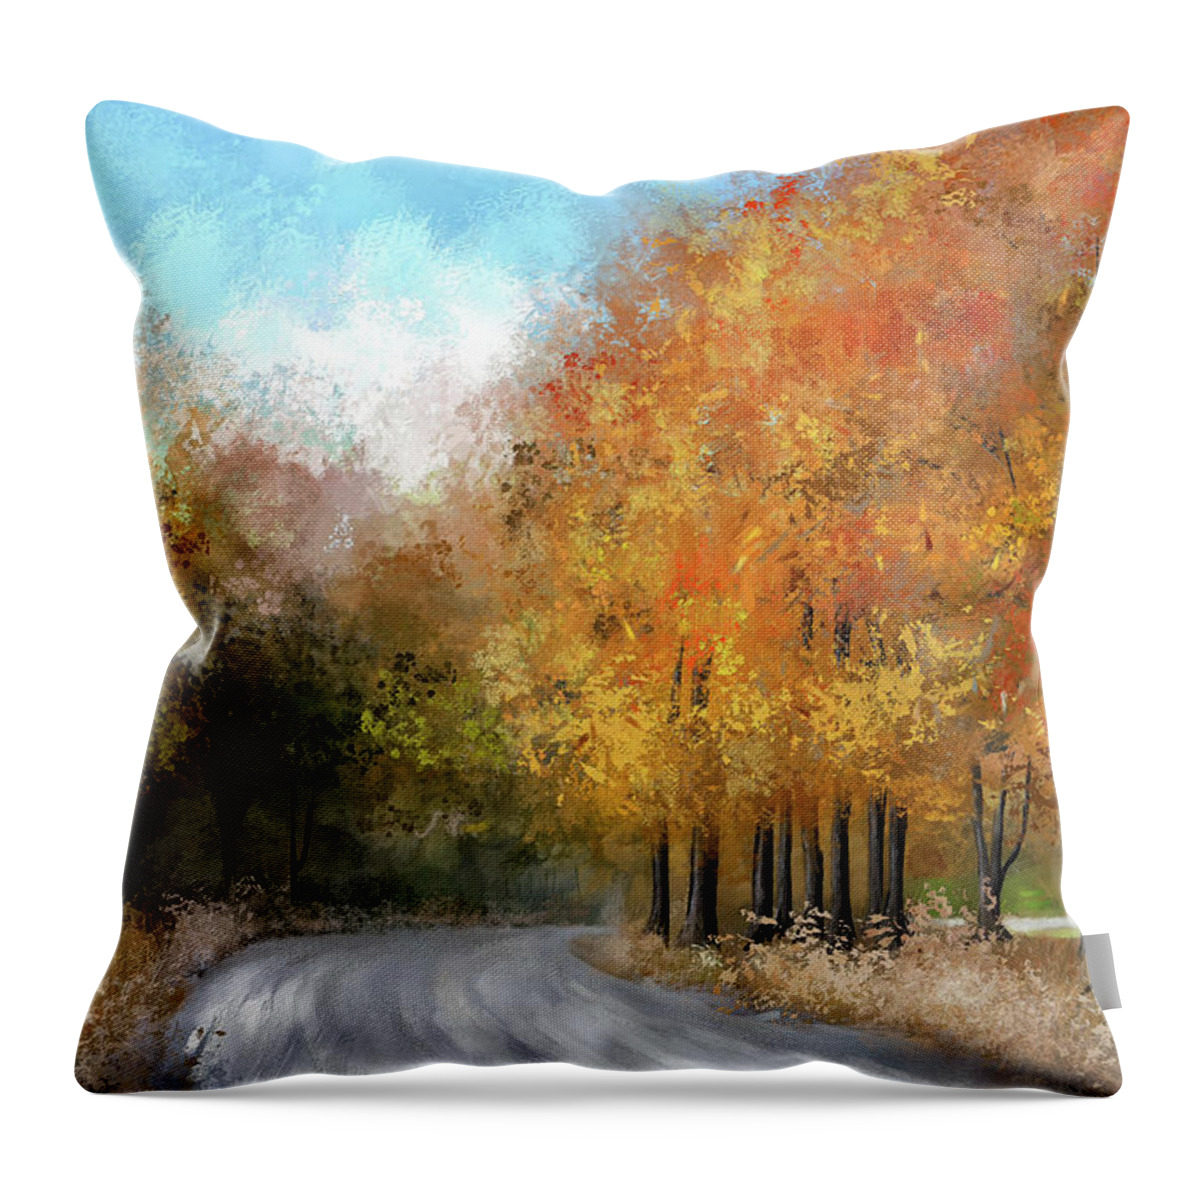 Autumn Throw Pillow featuring the digital art Almost There by Lois Bryan